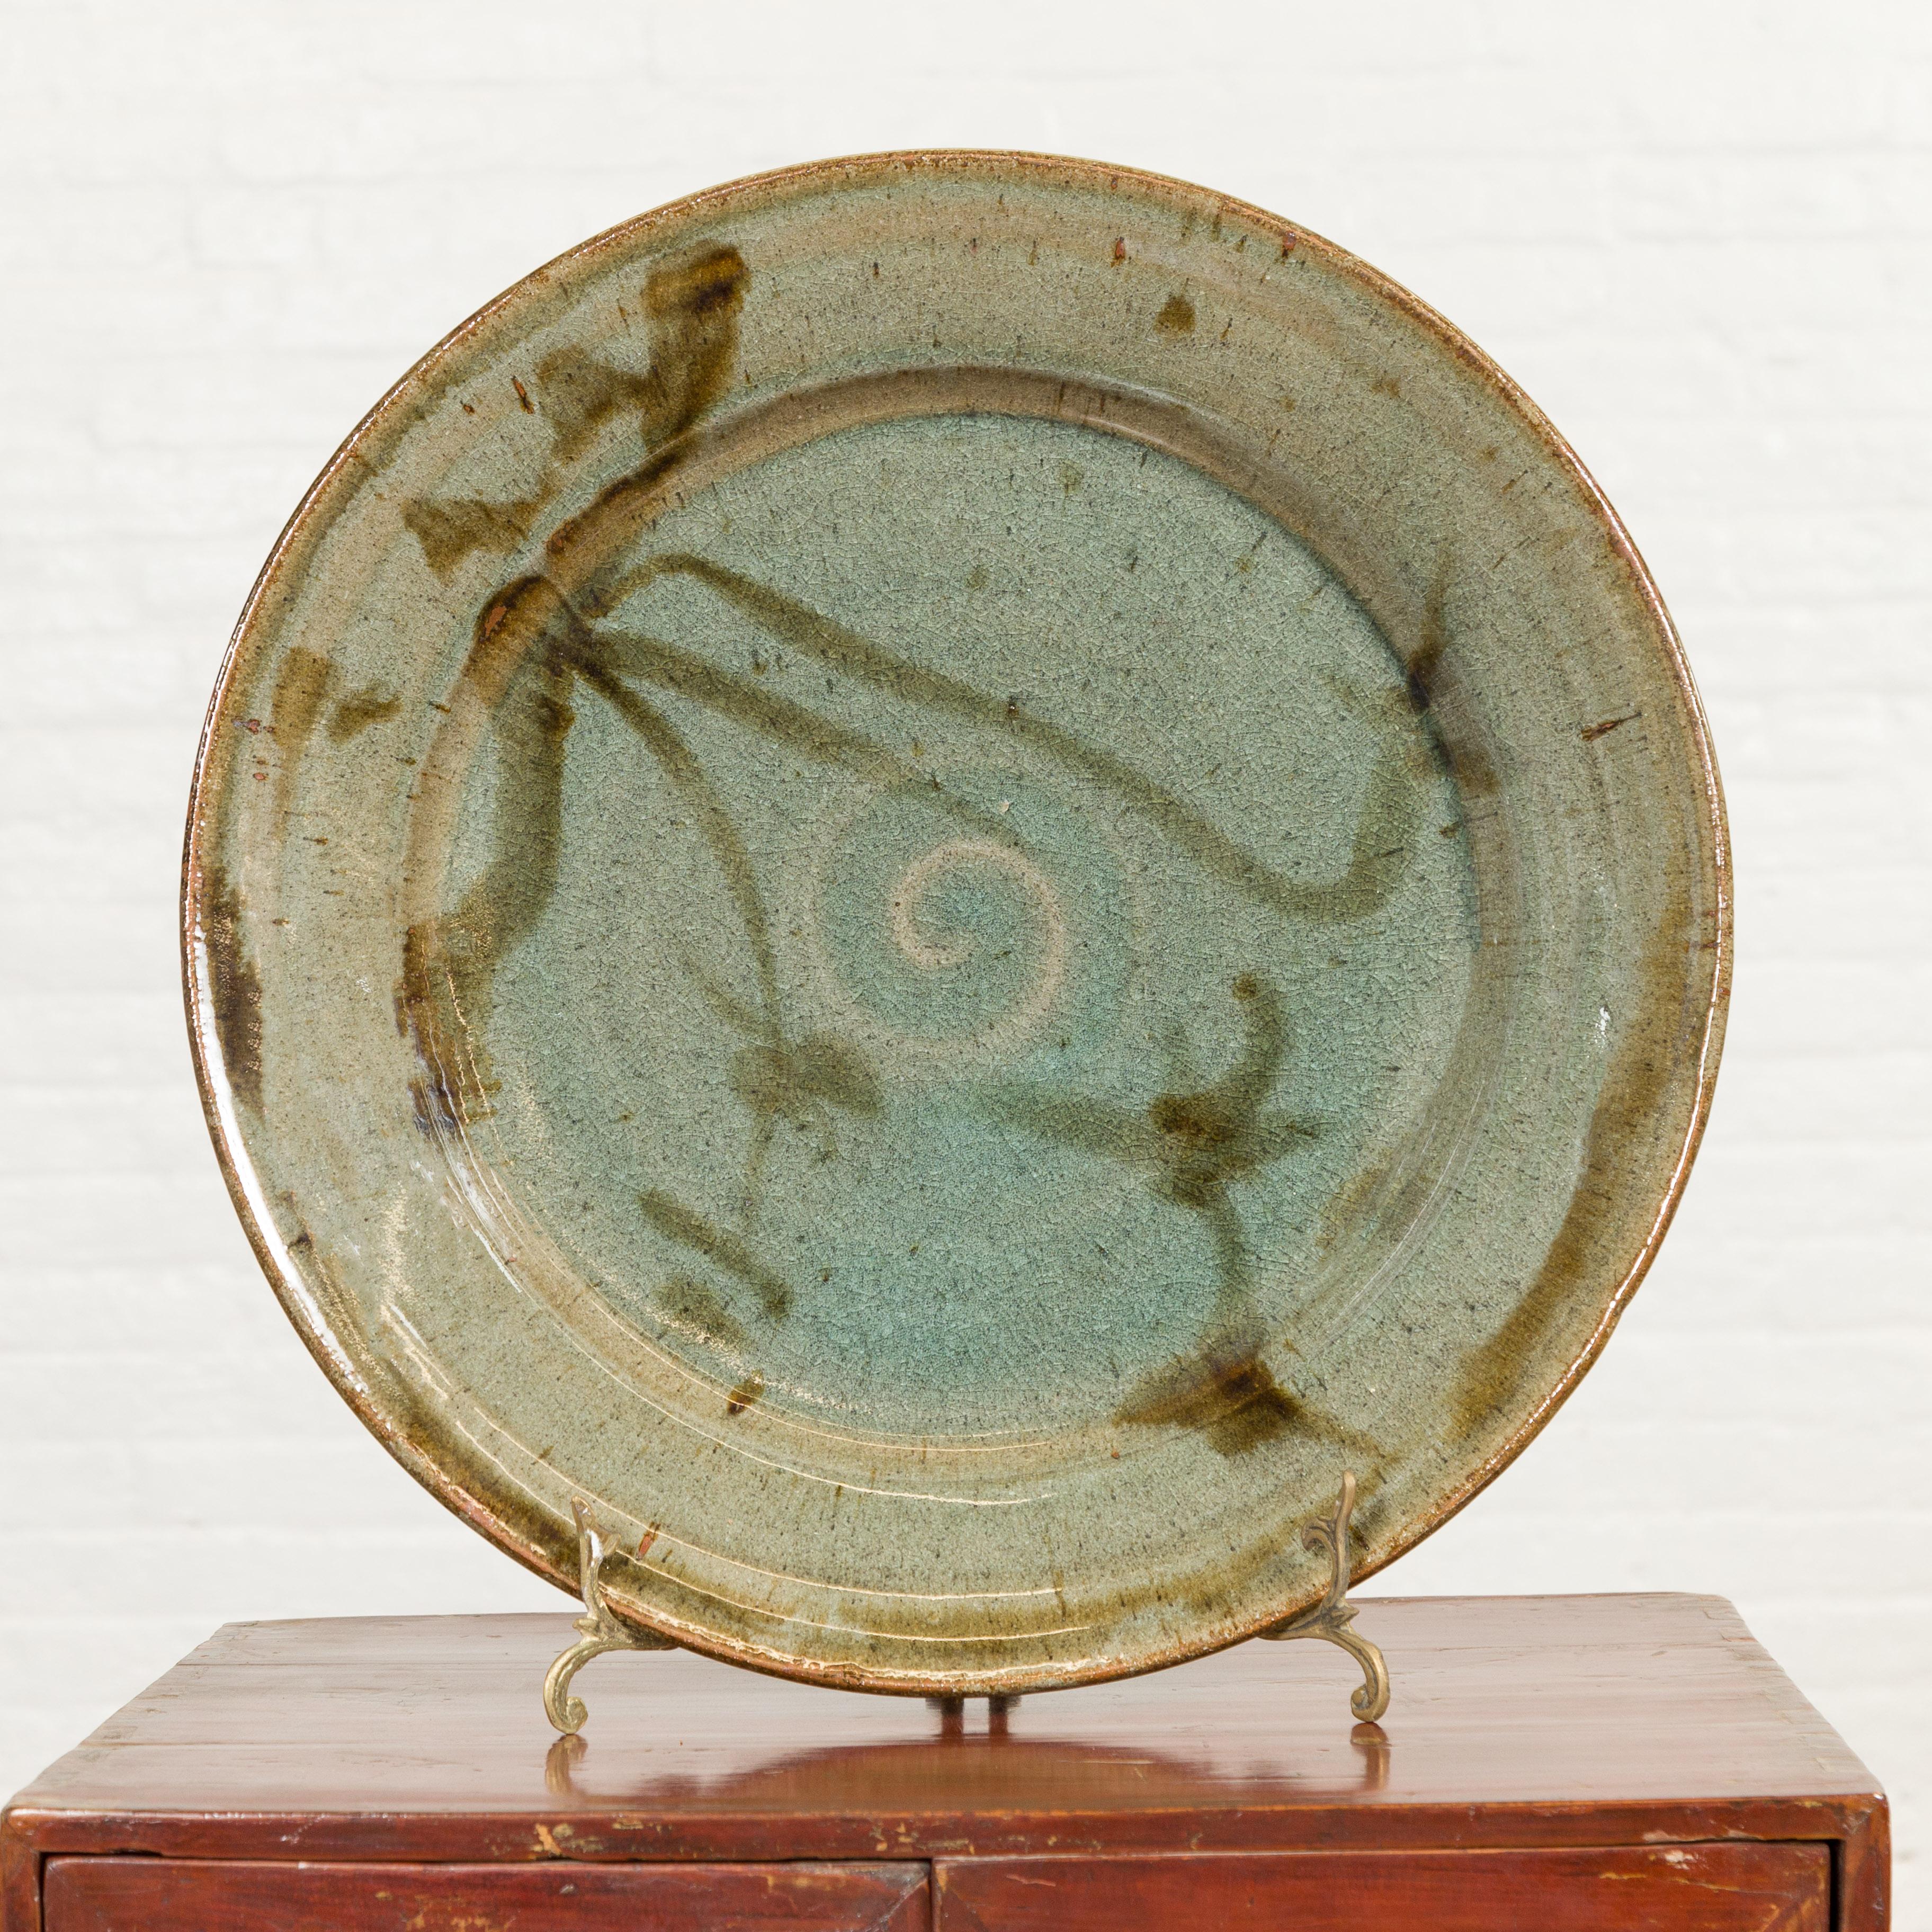 A contemporary Thai hand-thrown ceramic charger from Chiang Mai with hand painted decor. Created in Chiang Mai, Northern Thailand, this charger plate features a soft green hue perfectly contrasted to brown tones accents and adorned with a central